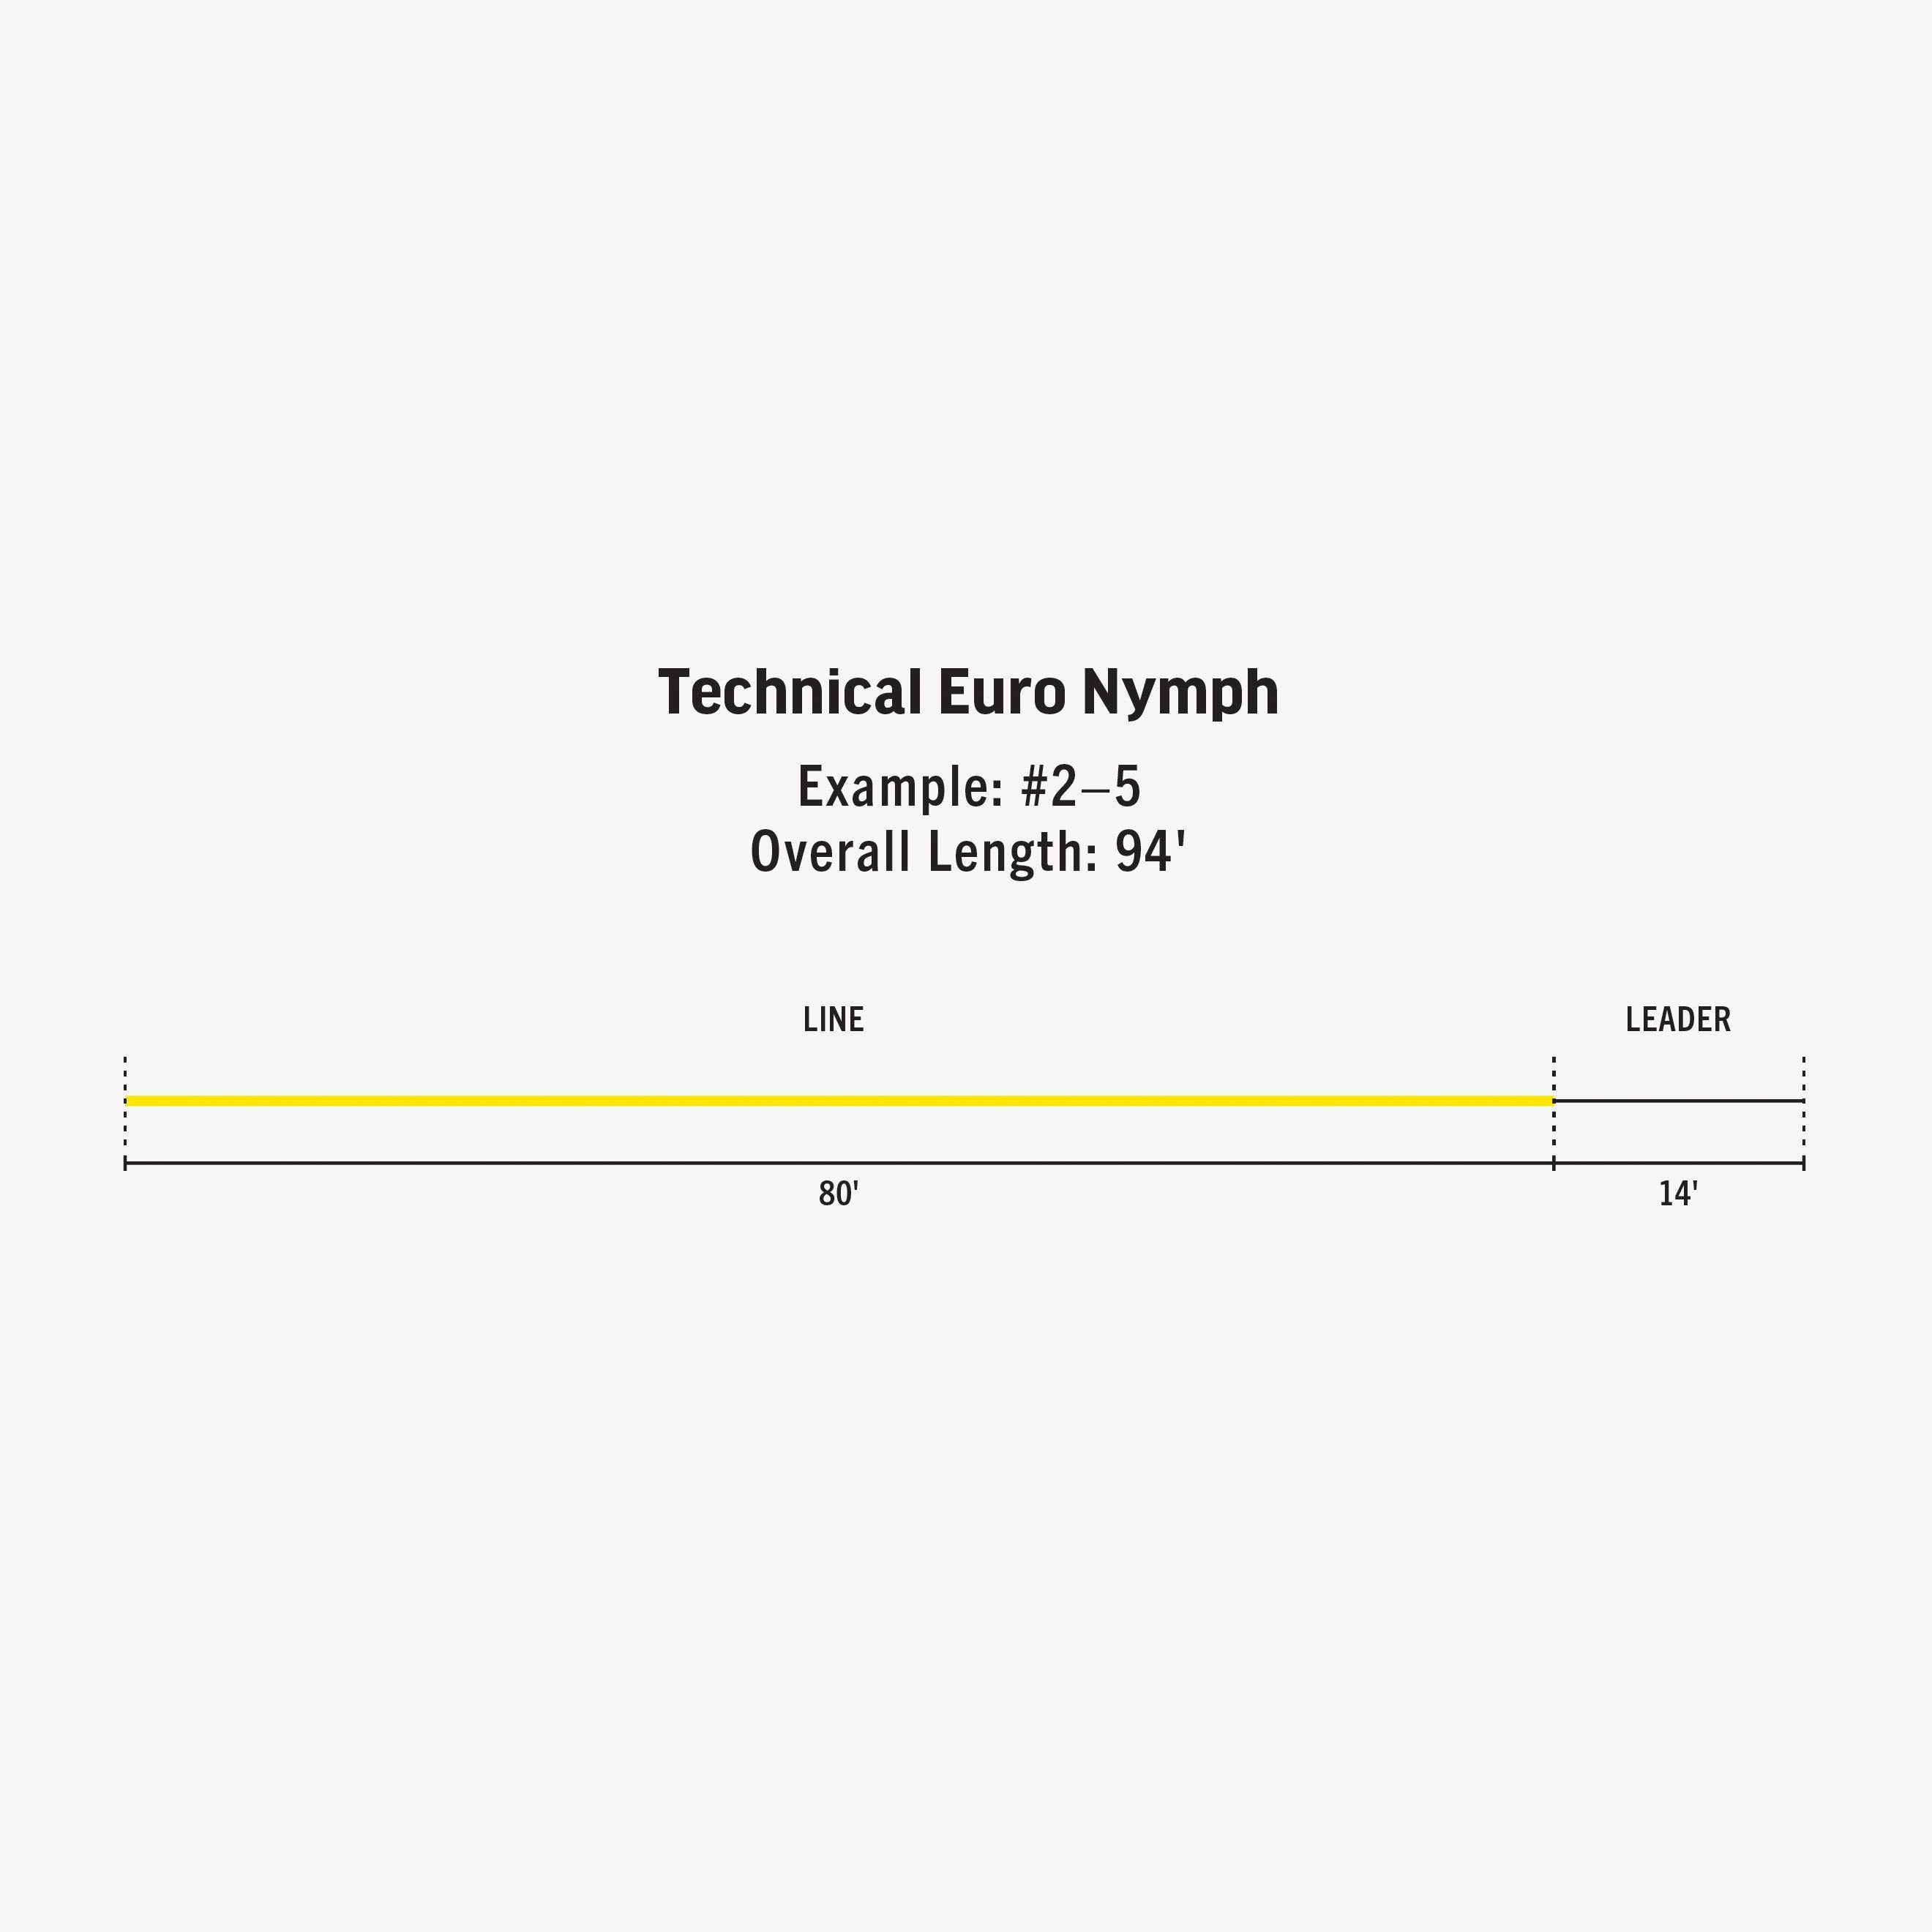 Technical Euro Nymph Line